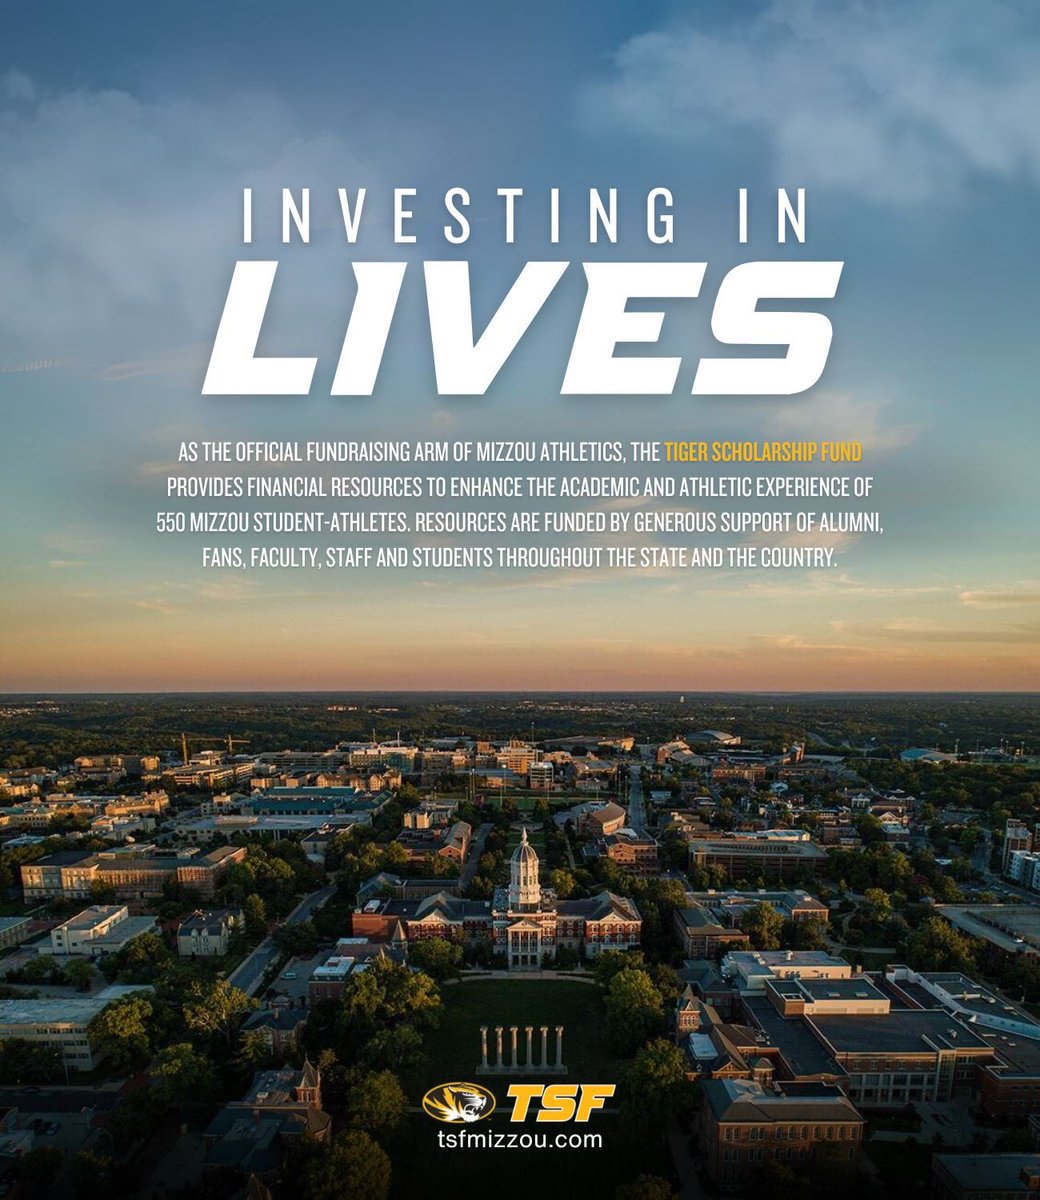 Each year,generous supporters of the TSF make a direct impact on the lives of Mizzou students-athletes.Your gift to TSF is an investment in the advancement of Mizzou athletics Consider investing in the lives of present and future Tigers by giving at tsfmizzou.com today